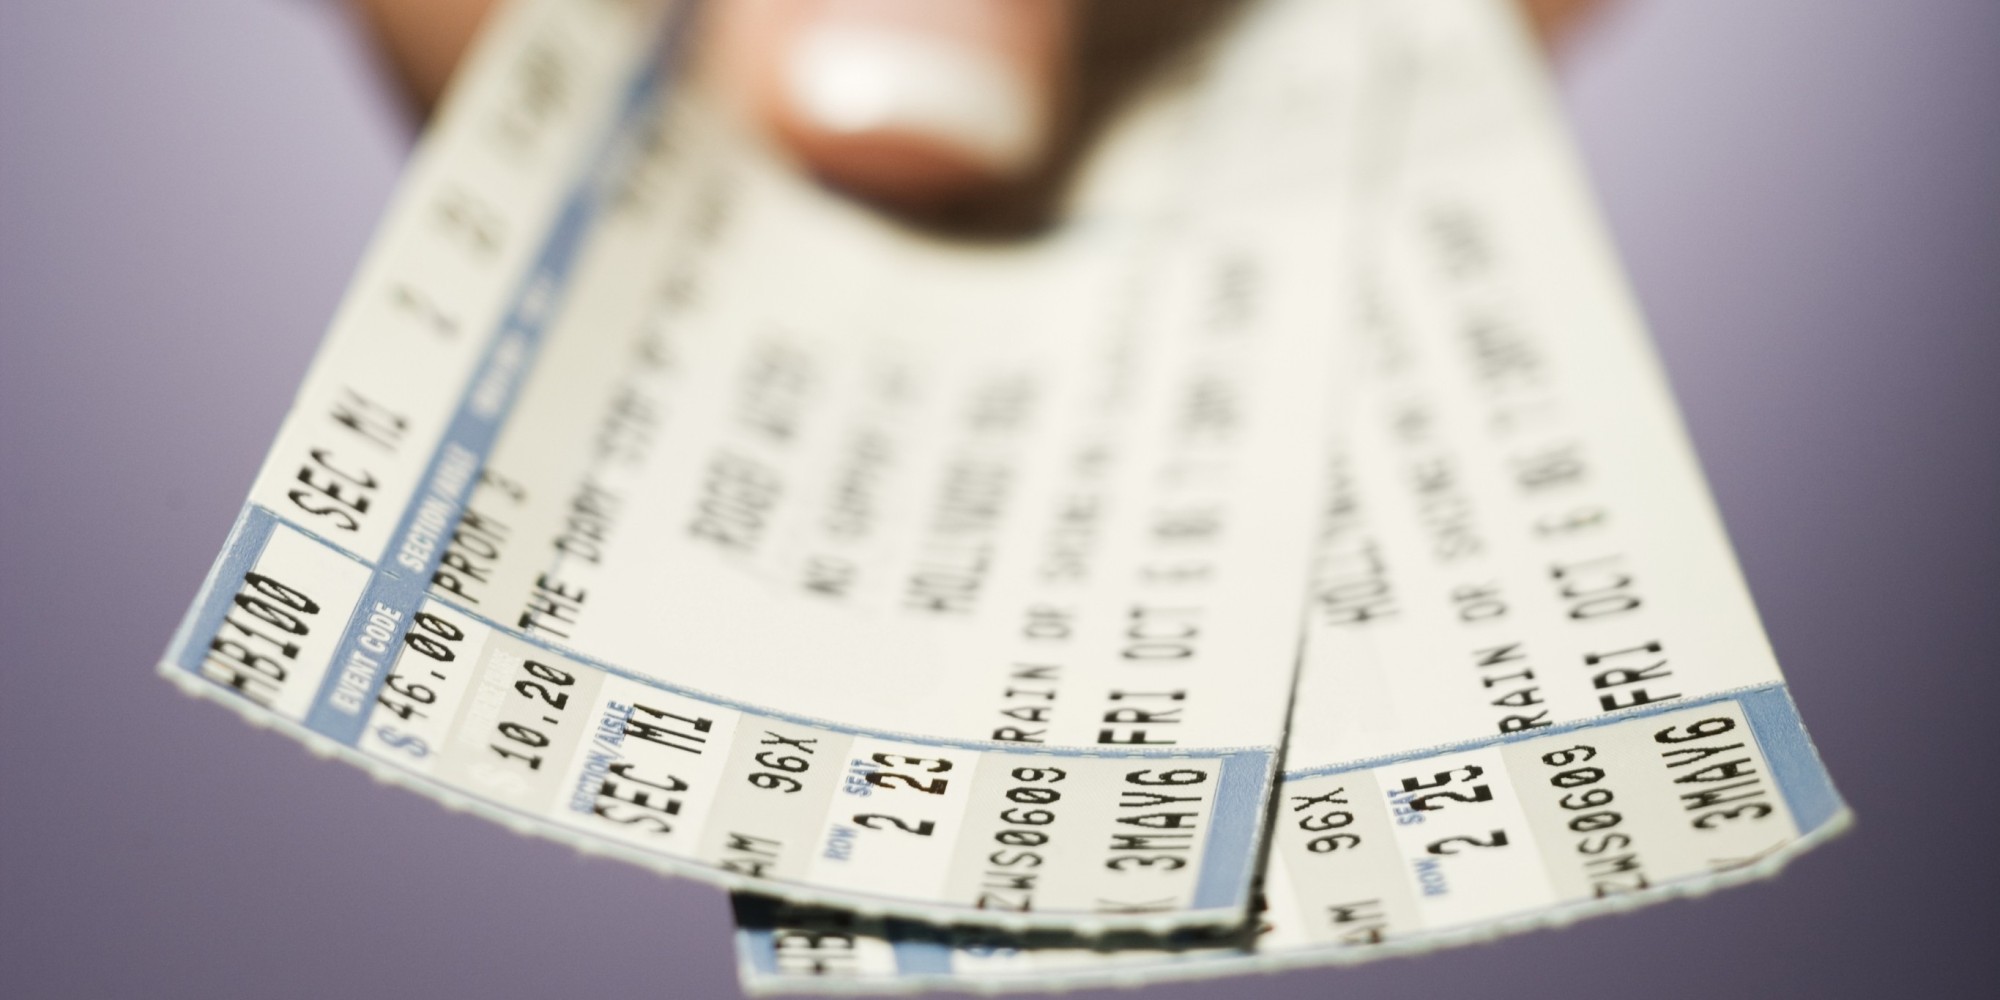 Live concert Seat tickets: The way to Shop Smart and steer clear of Scams